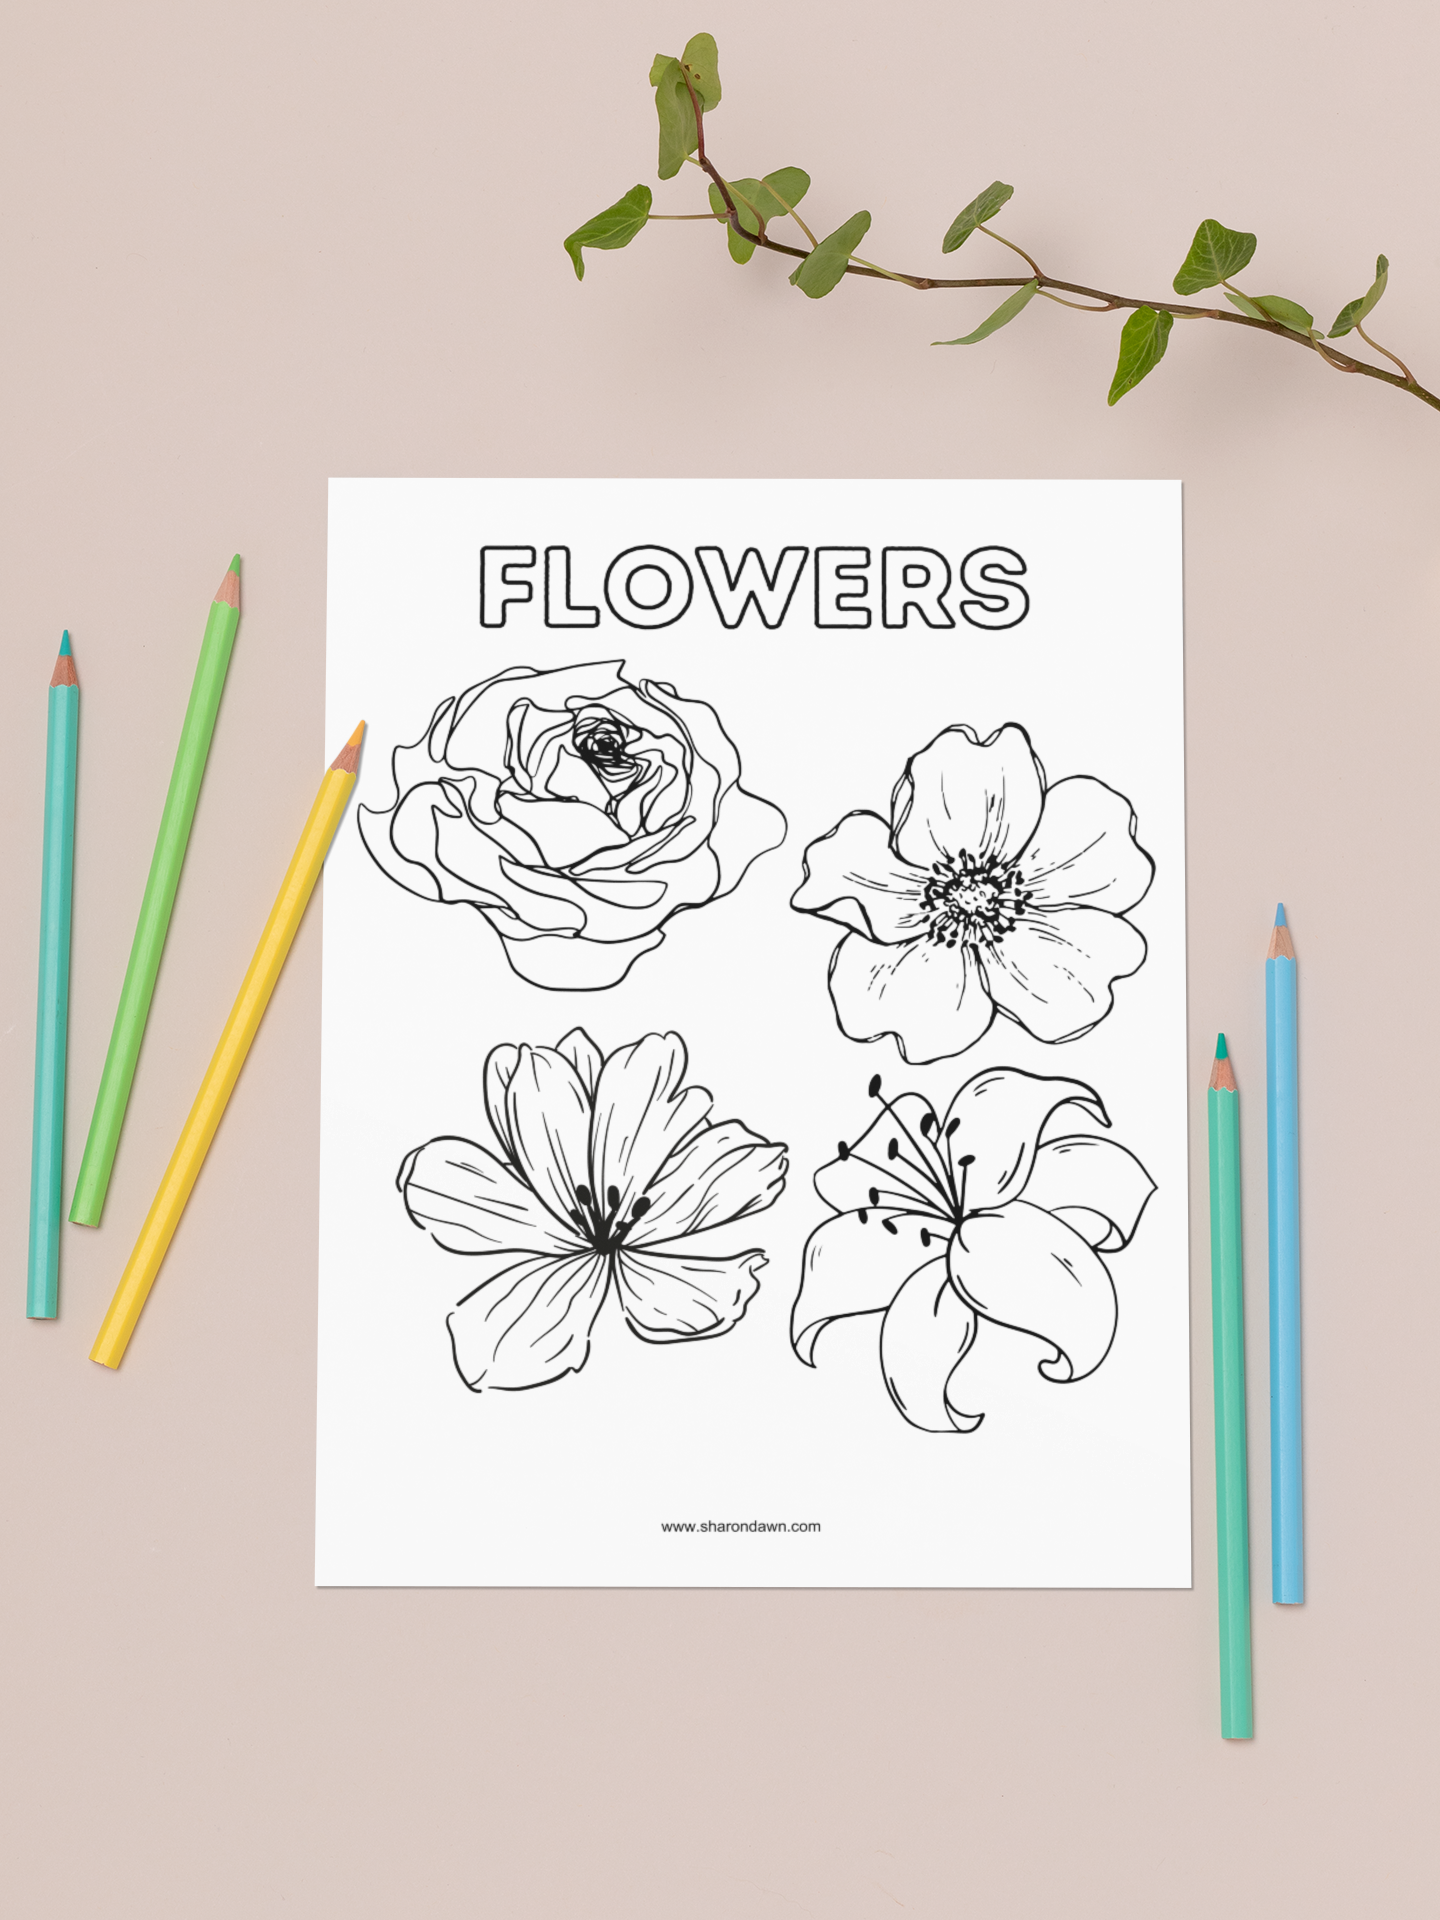 Flowers - Colouring Sheet - Printable Digital Download ~ Sharon Dawn Collection